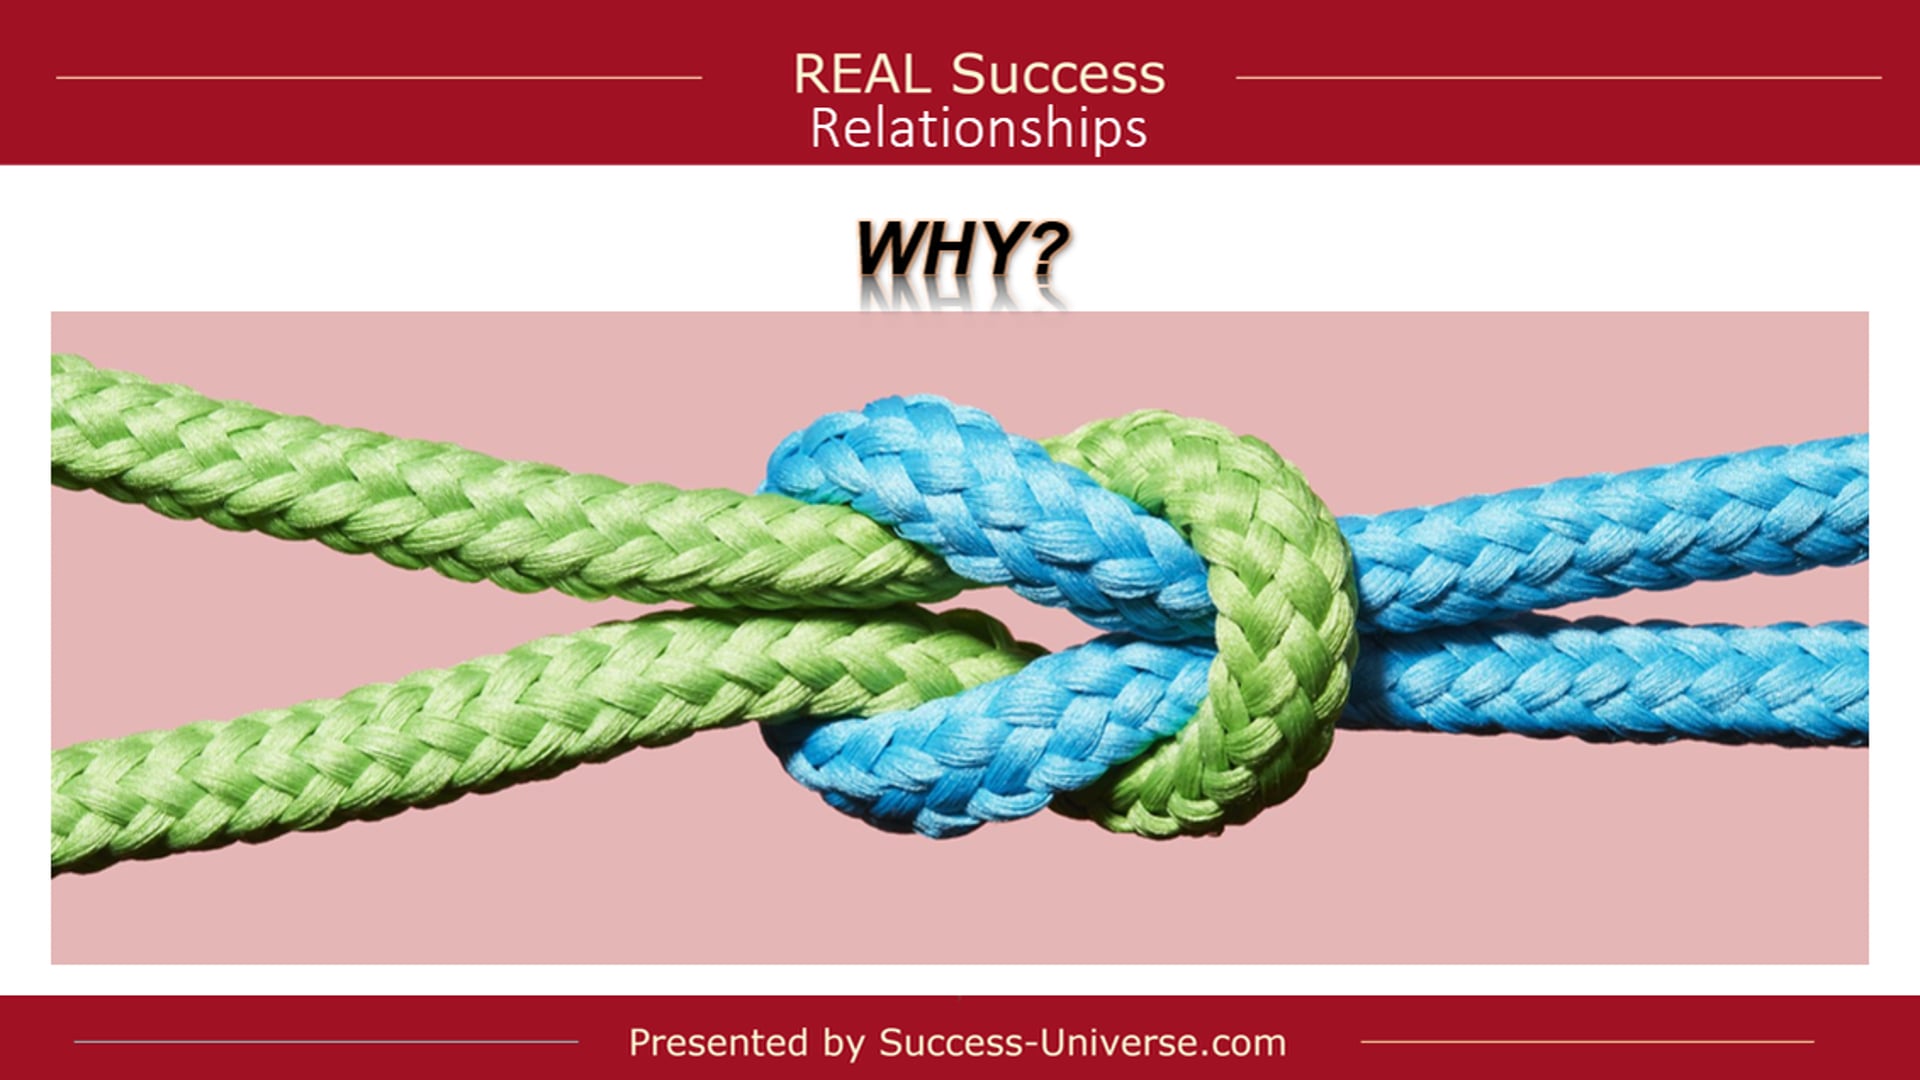 REAL Success - Relationships